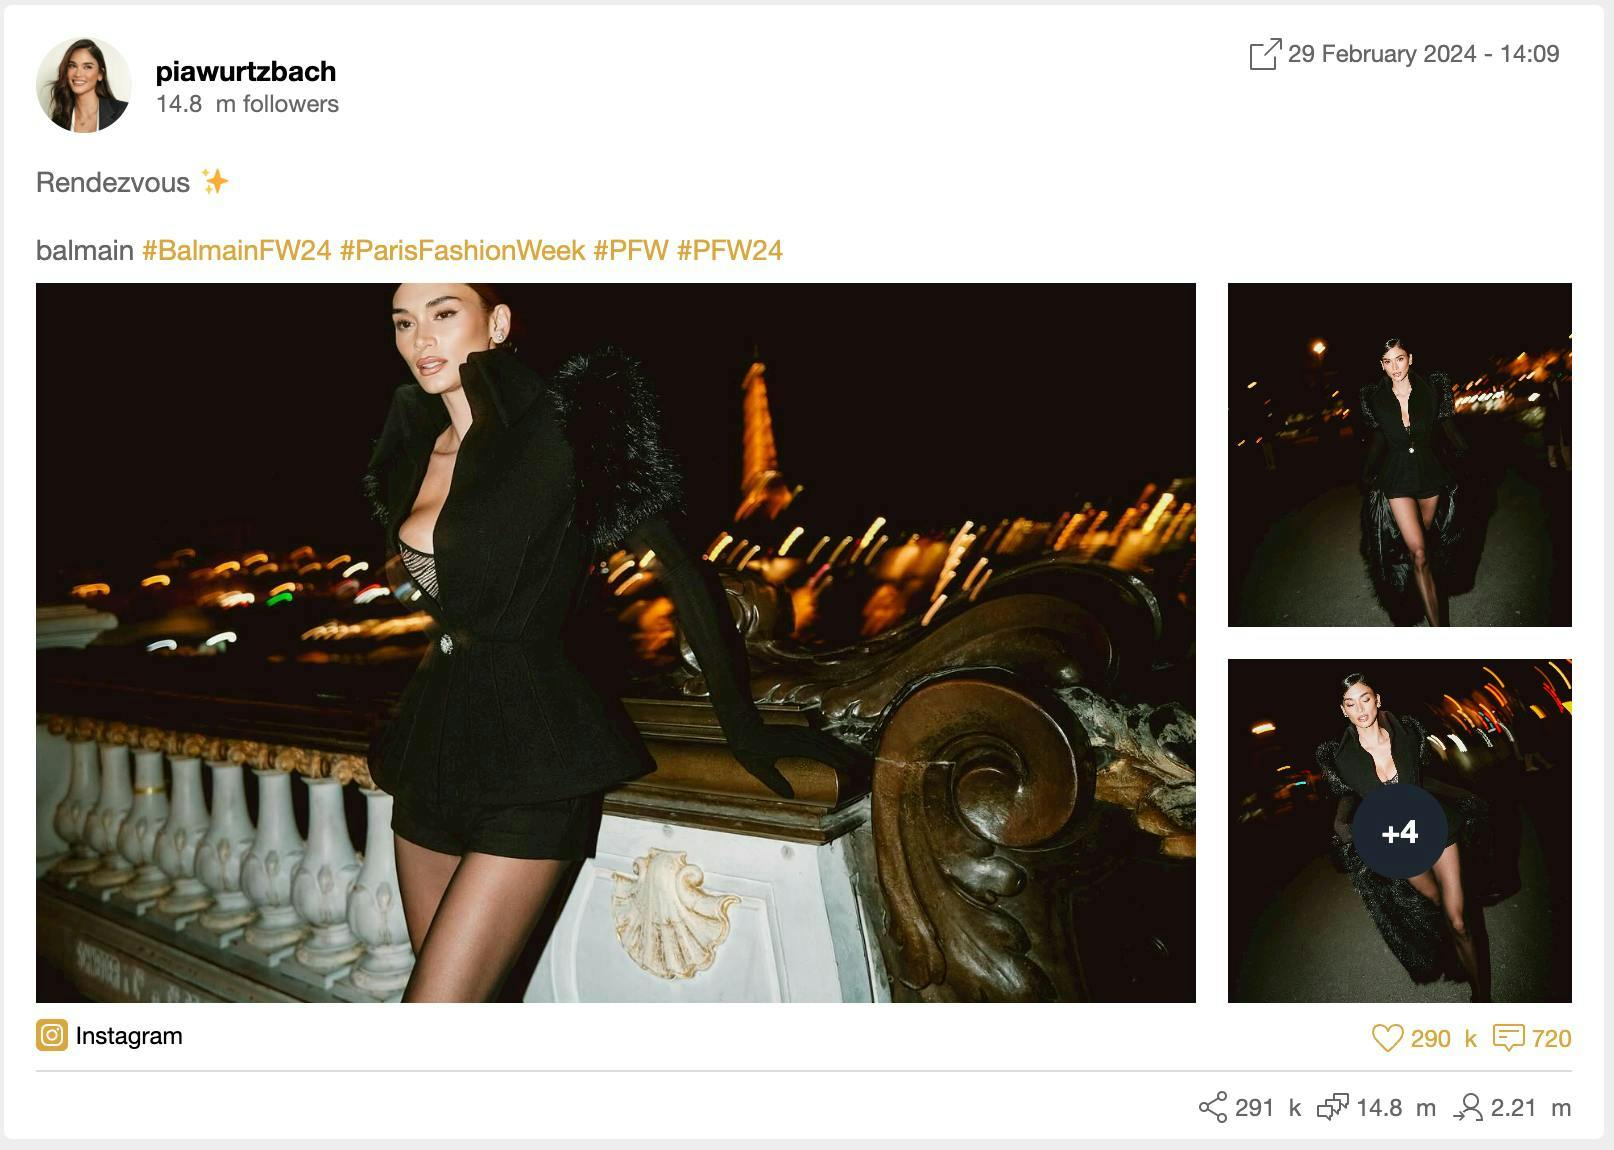 An Instagram post by Pia Wurtzbach showing her in a Balmain look with the Eiffel Tower in the background.